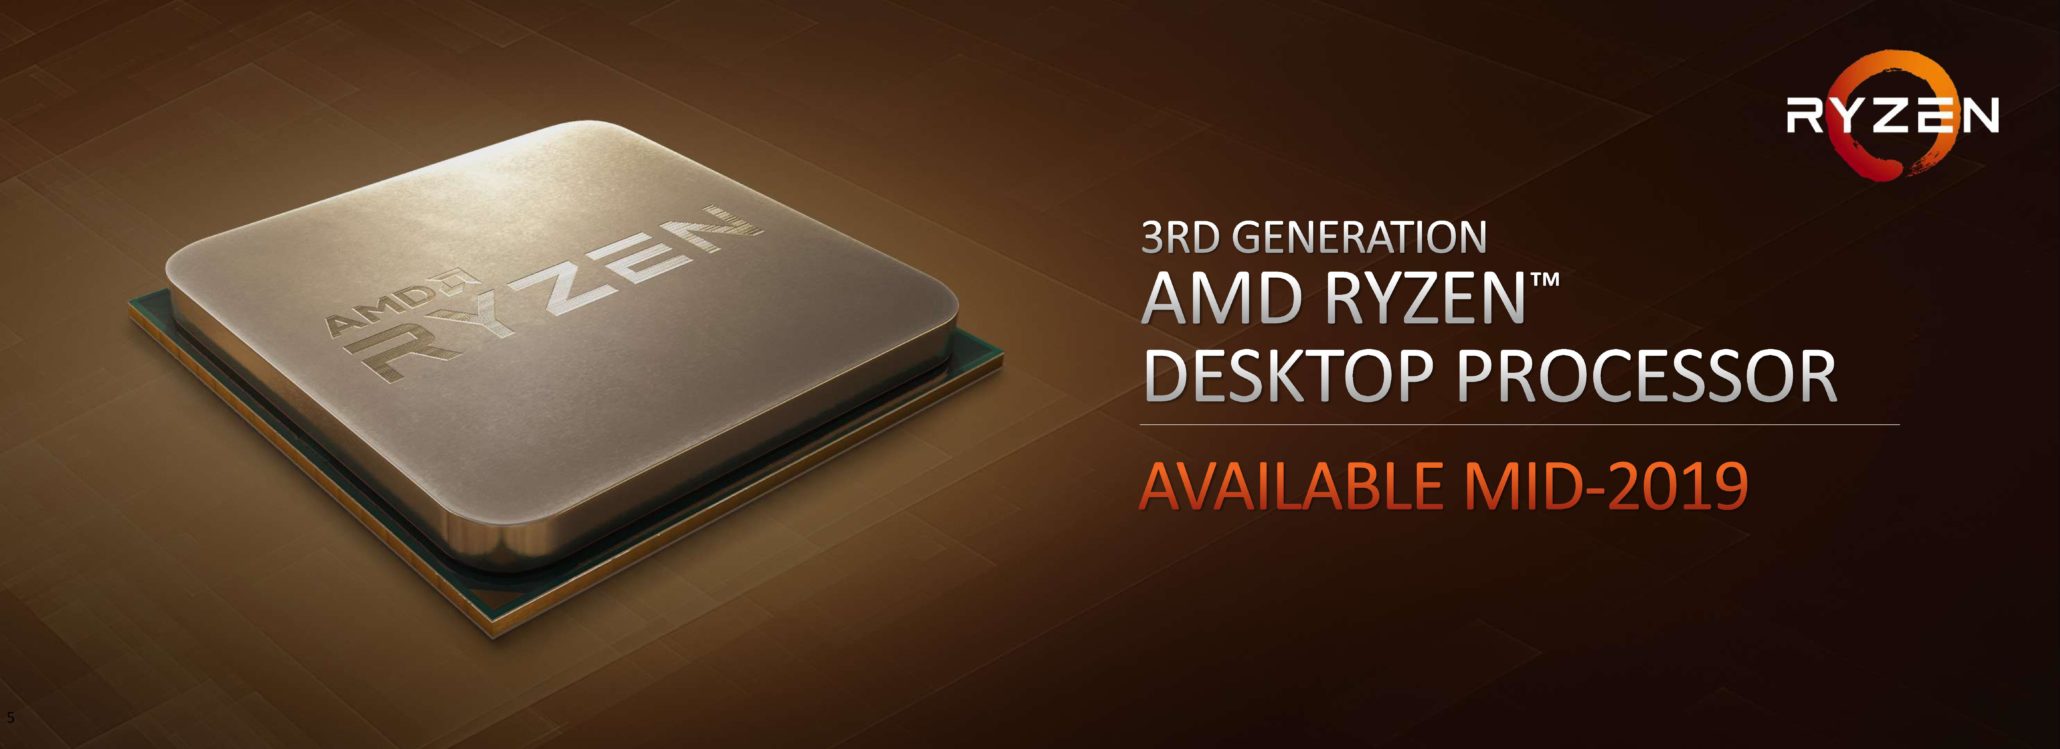 AMD Ryzen 3000 Series Specifications & Ceny Leaked, New Ryzen 7 Series Might Hit 5 GHz on Boost Clock